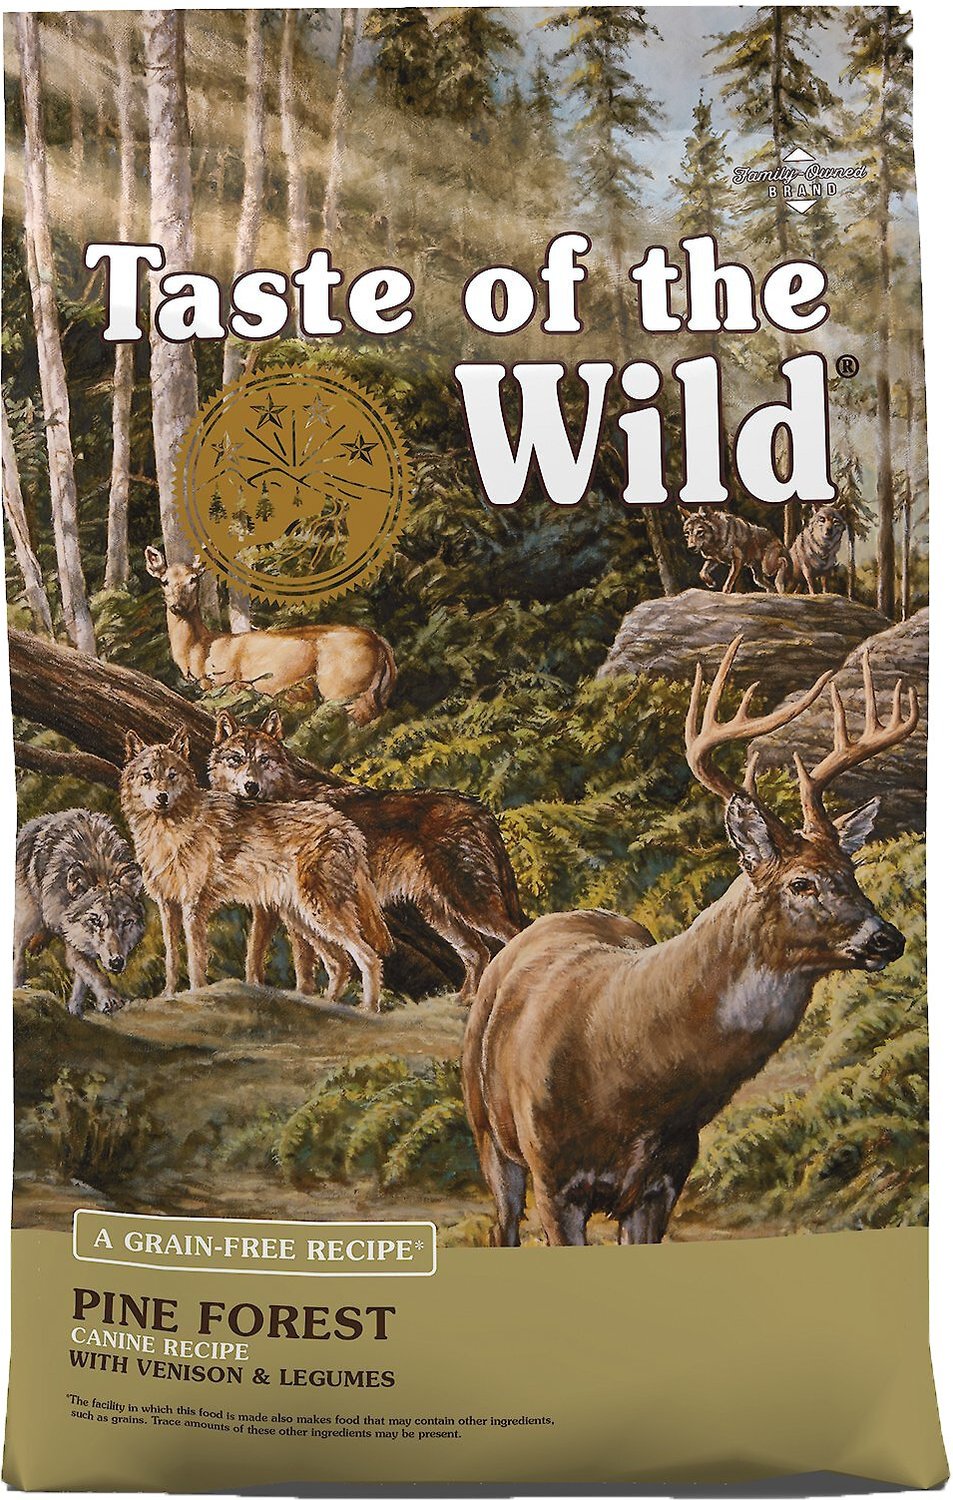 Taste Of The Wild Pine Forest Grain Free Dry Dog Food 5 Lb Bag Chewy Com Taste of the wild dog food at zooplus uk is also available in great value. taste of the wild pine forest grain free dry dog food